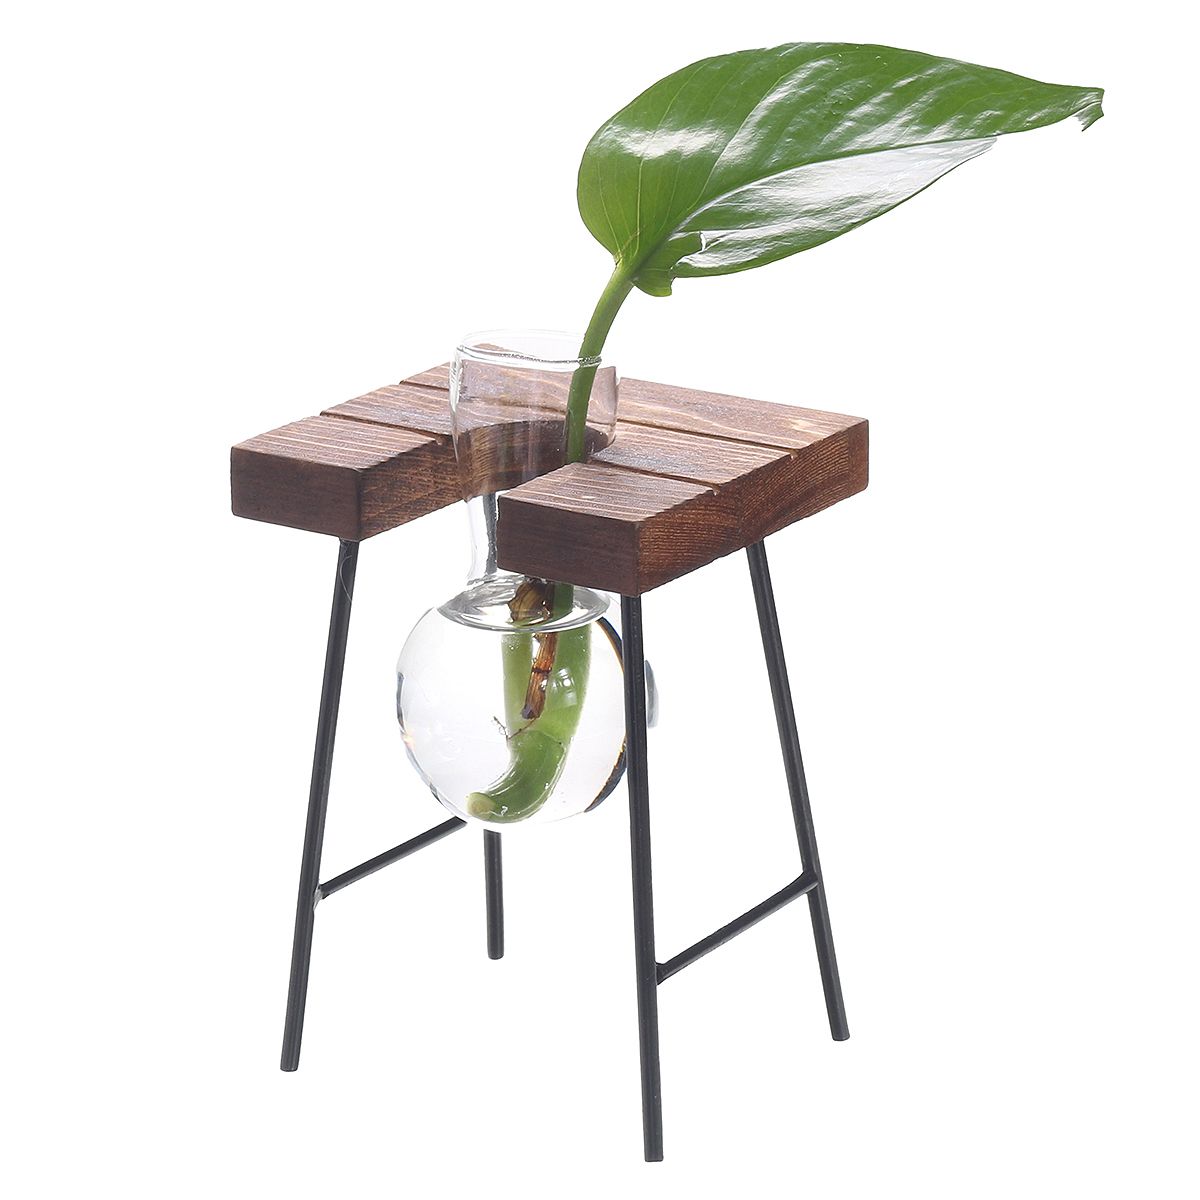 Ball-Shape-Glass-Vase-Plant-Hydroponic-Container-Flower-Bottle-Table-Desk-Decor-with-Wooden-Shelf-St-1478846